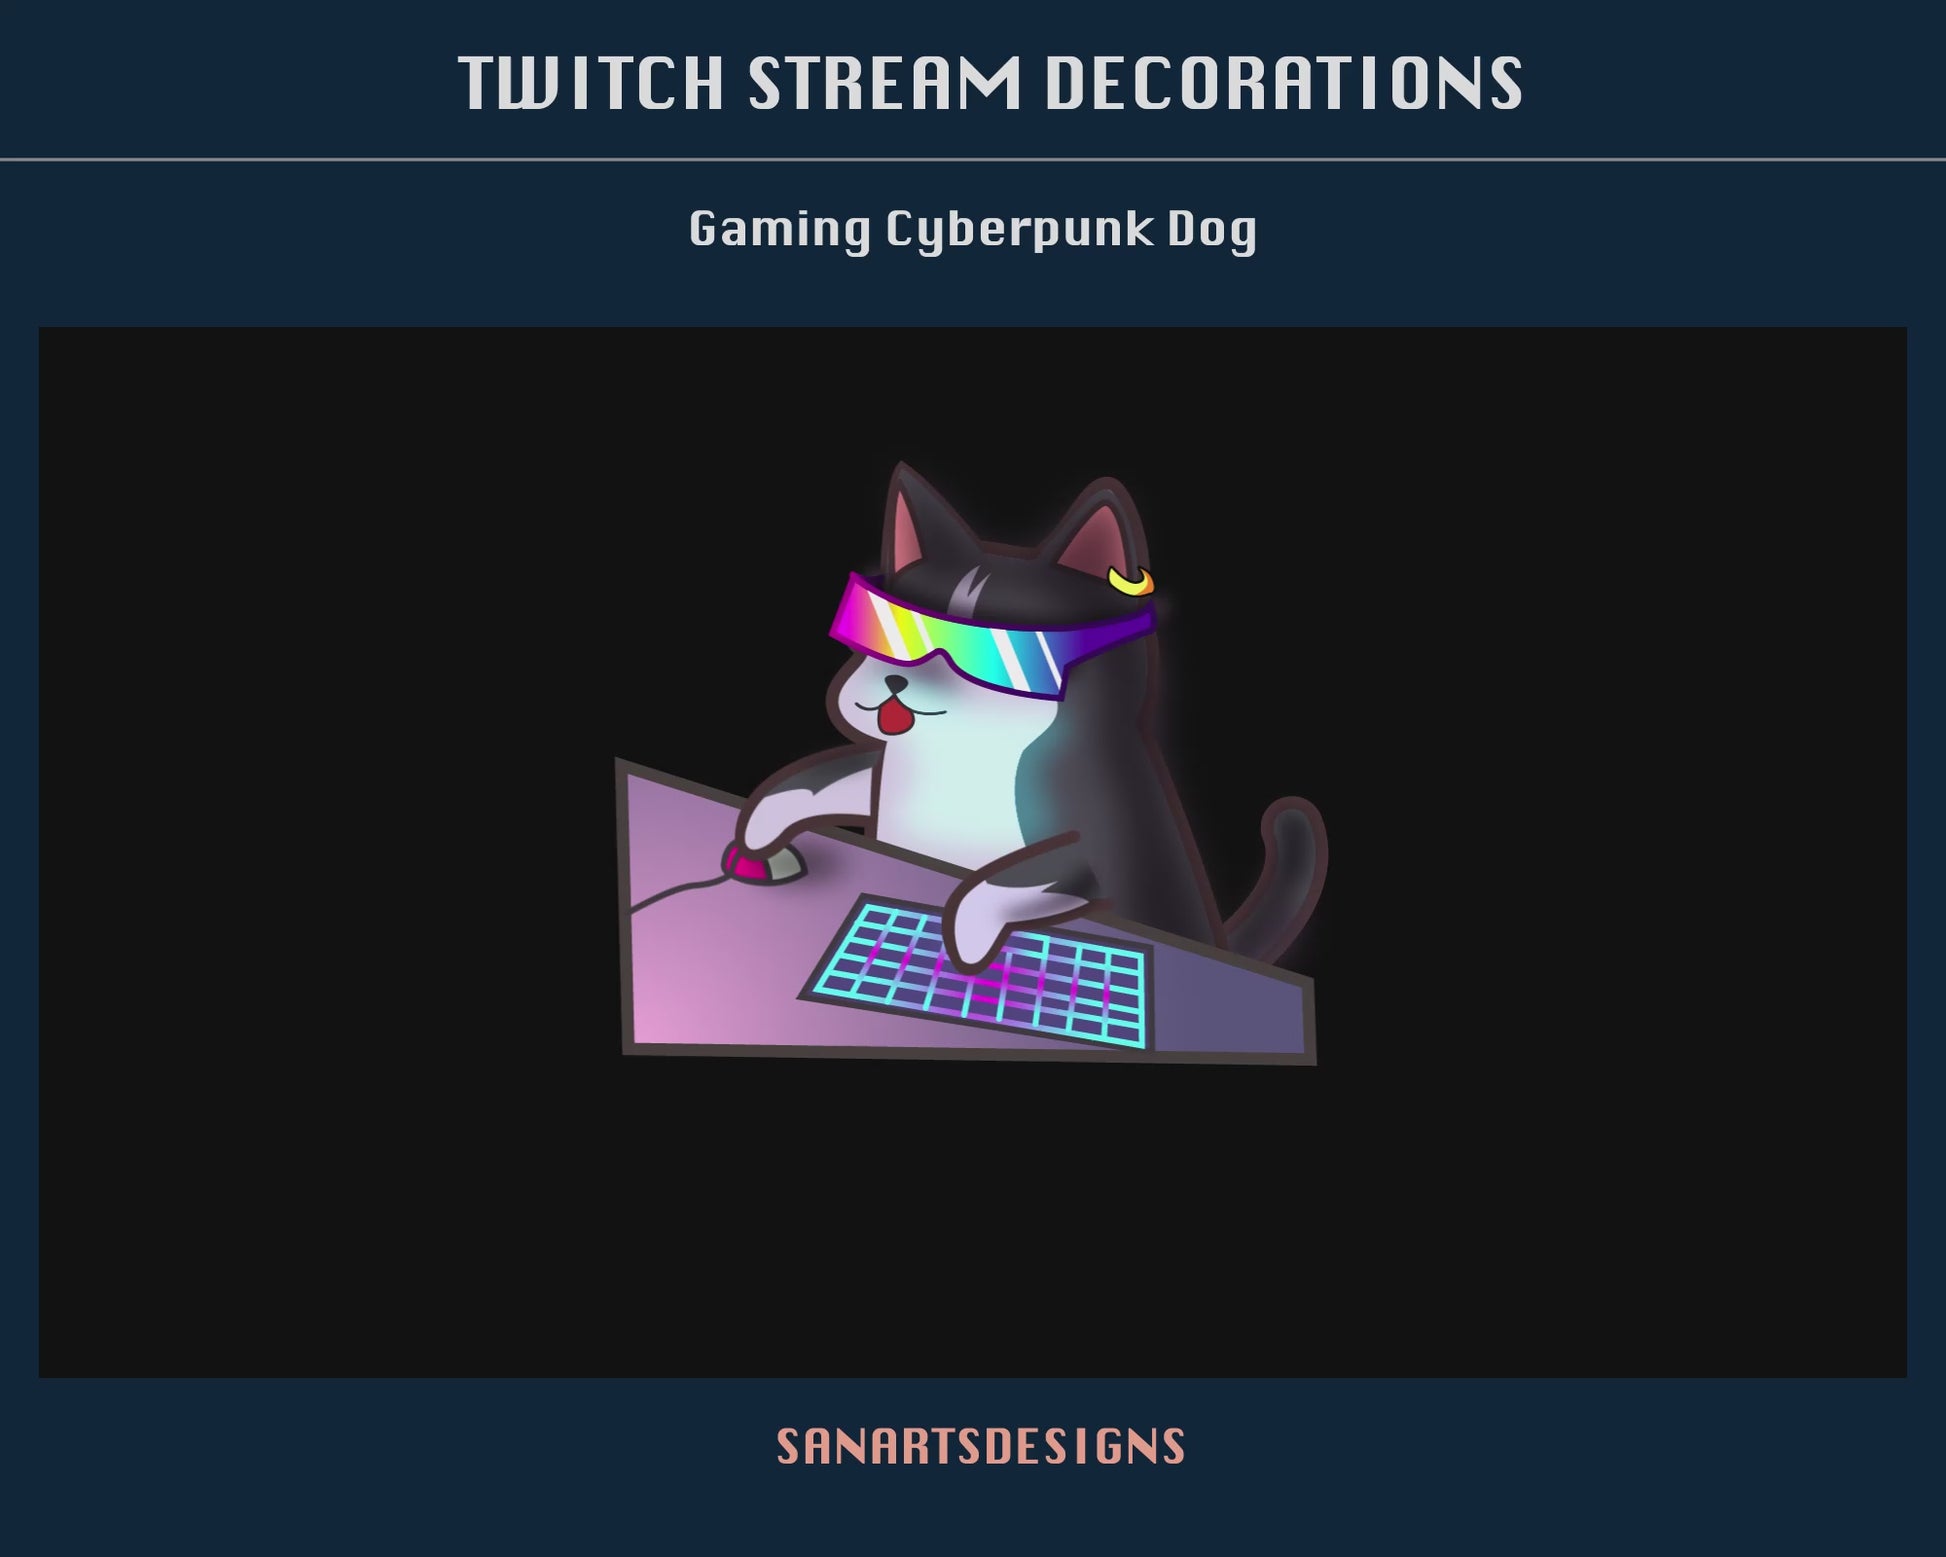 Cute Gaming Cyber Dog Animated Stream Decorations